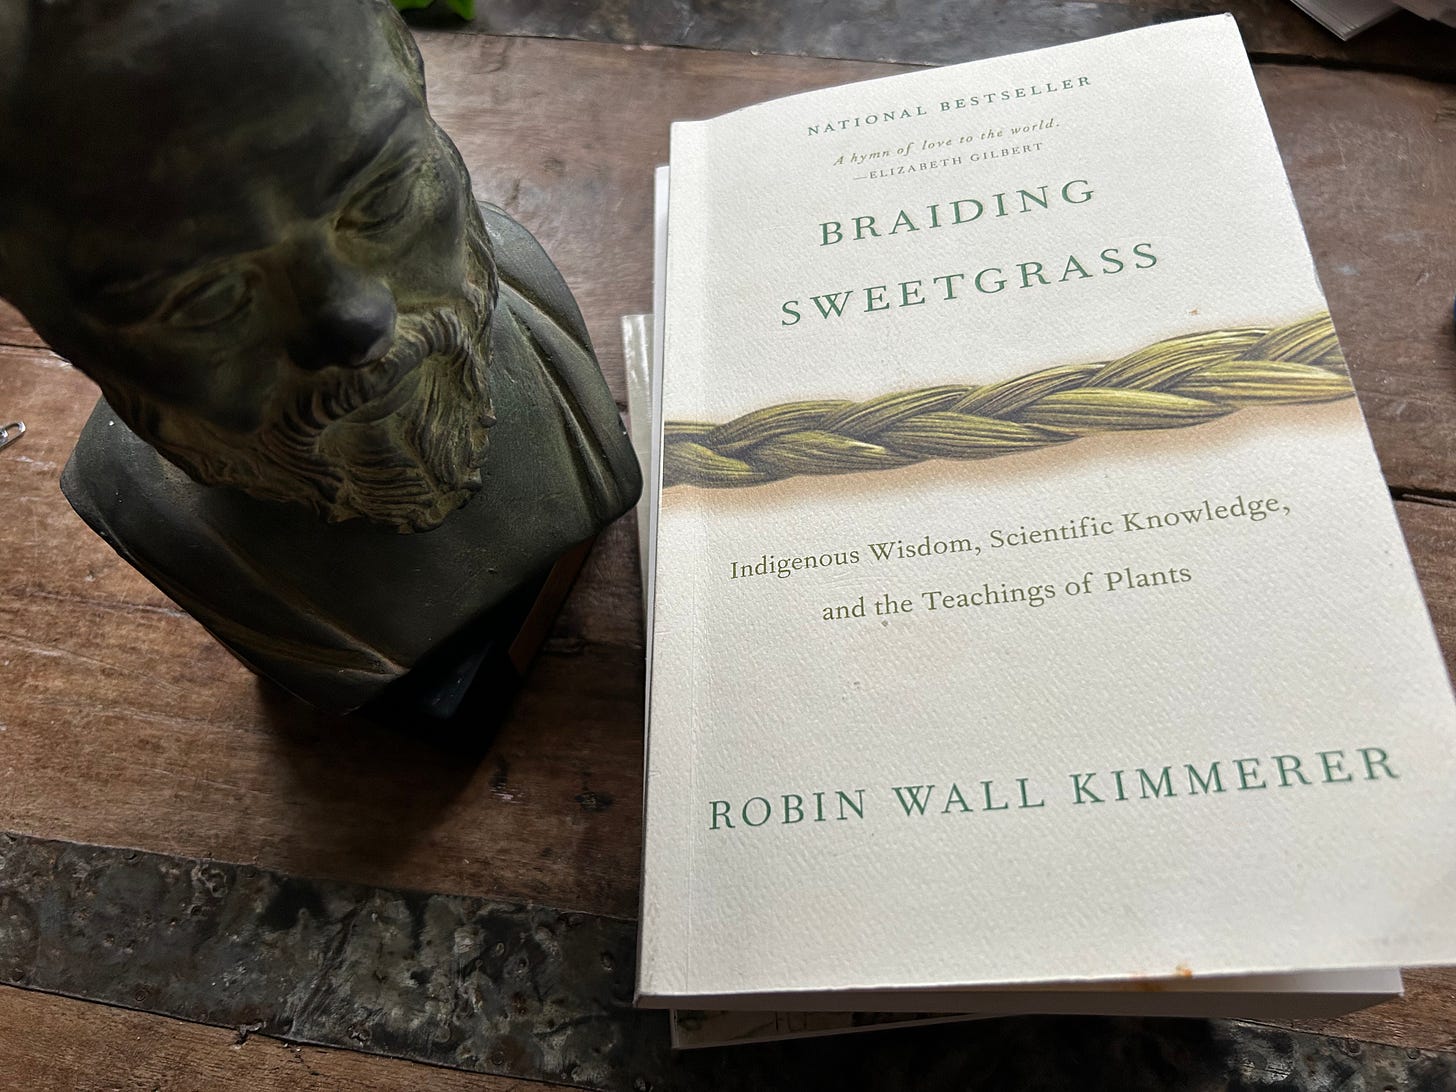 A bronze statue of the philosopher Socrates looms over a copy of Robin Wall Kimmerer's book Braiding Sweetgrass.